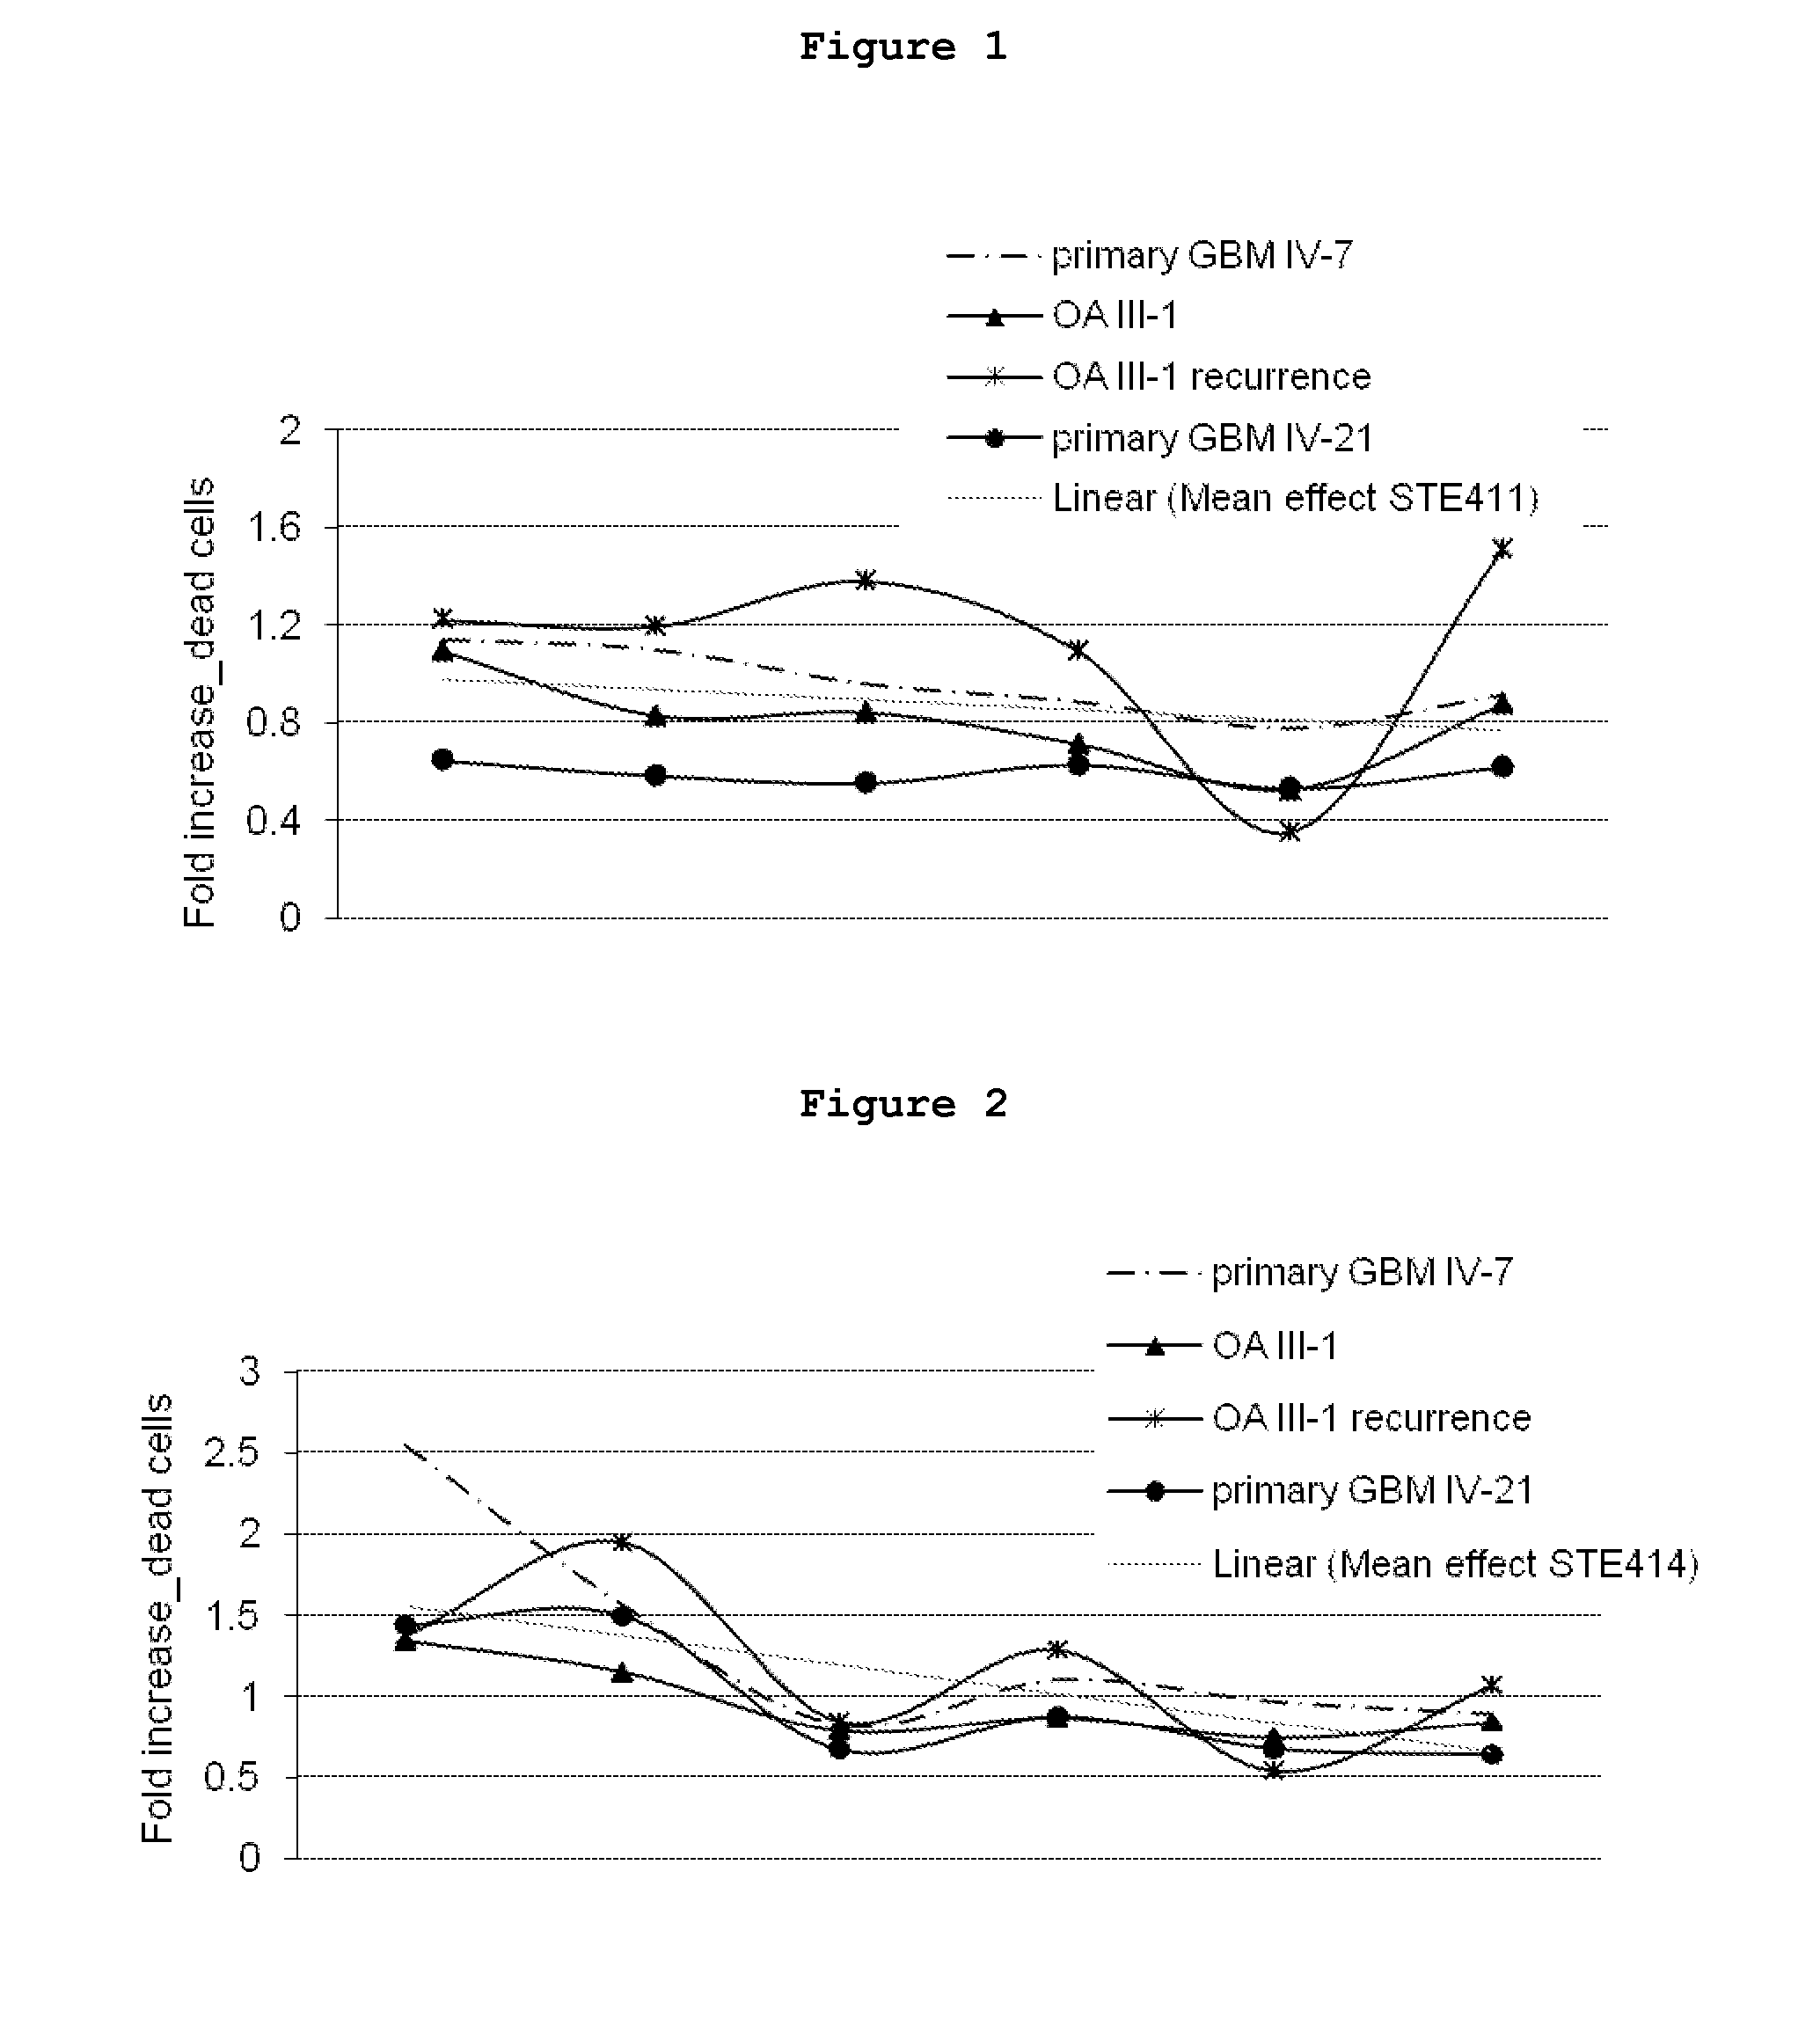 Inhibitors of the activity of complex iii of the mitochondrial electron transport chain and use thereof for treating diseases